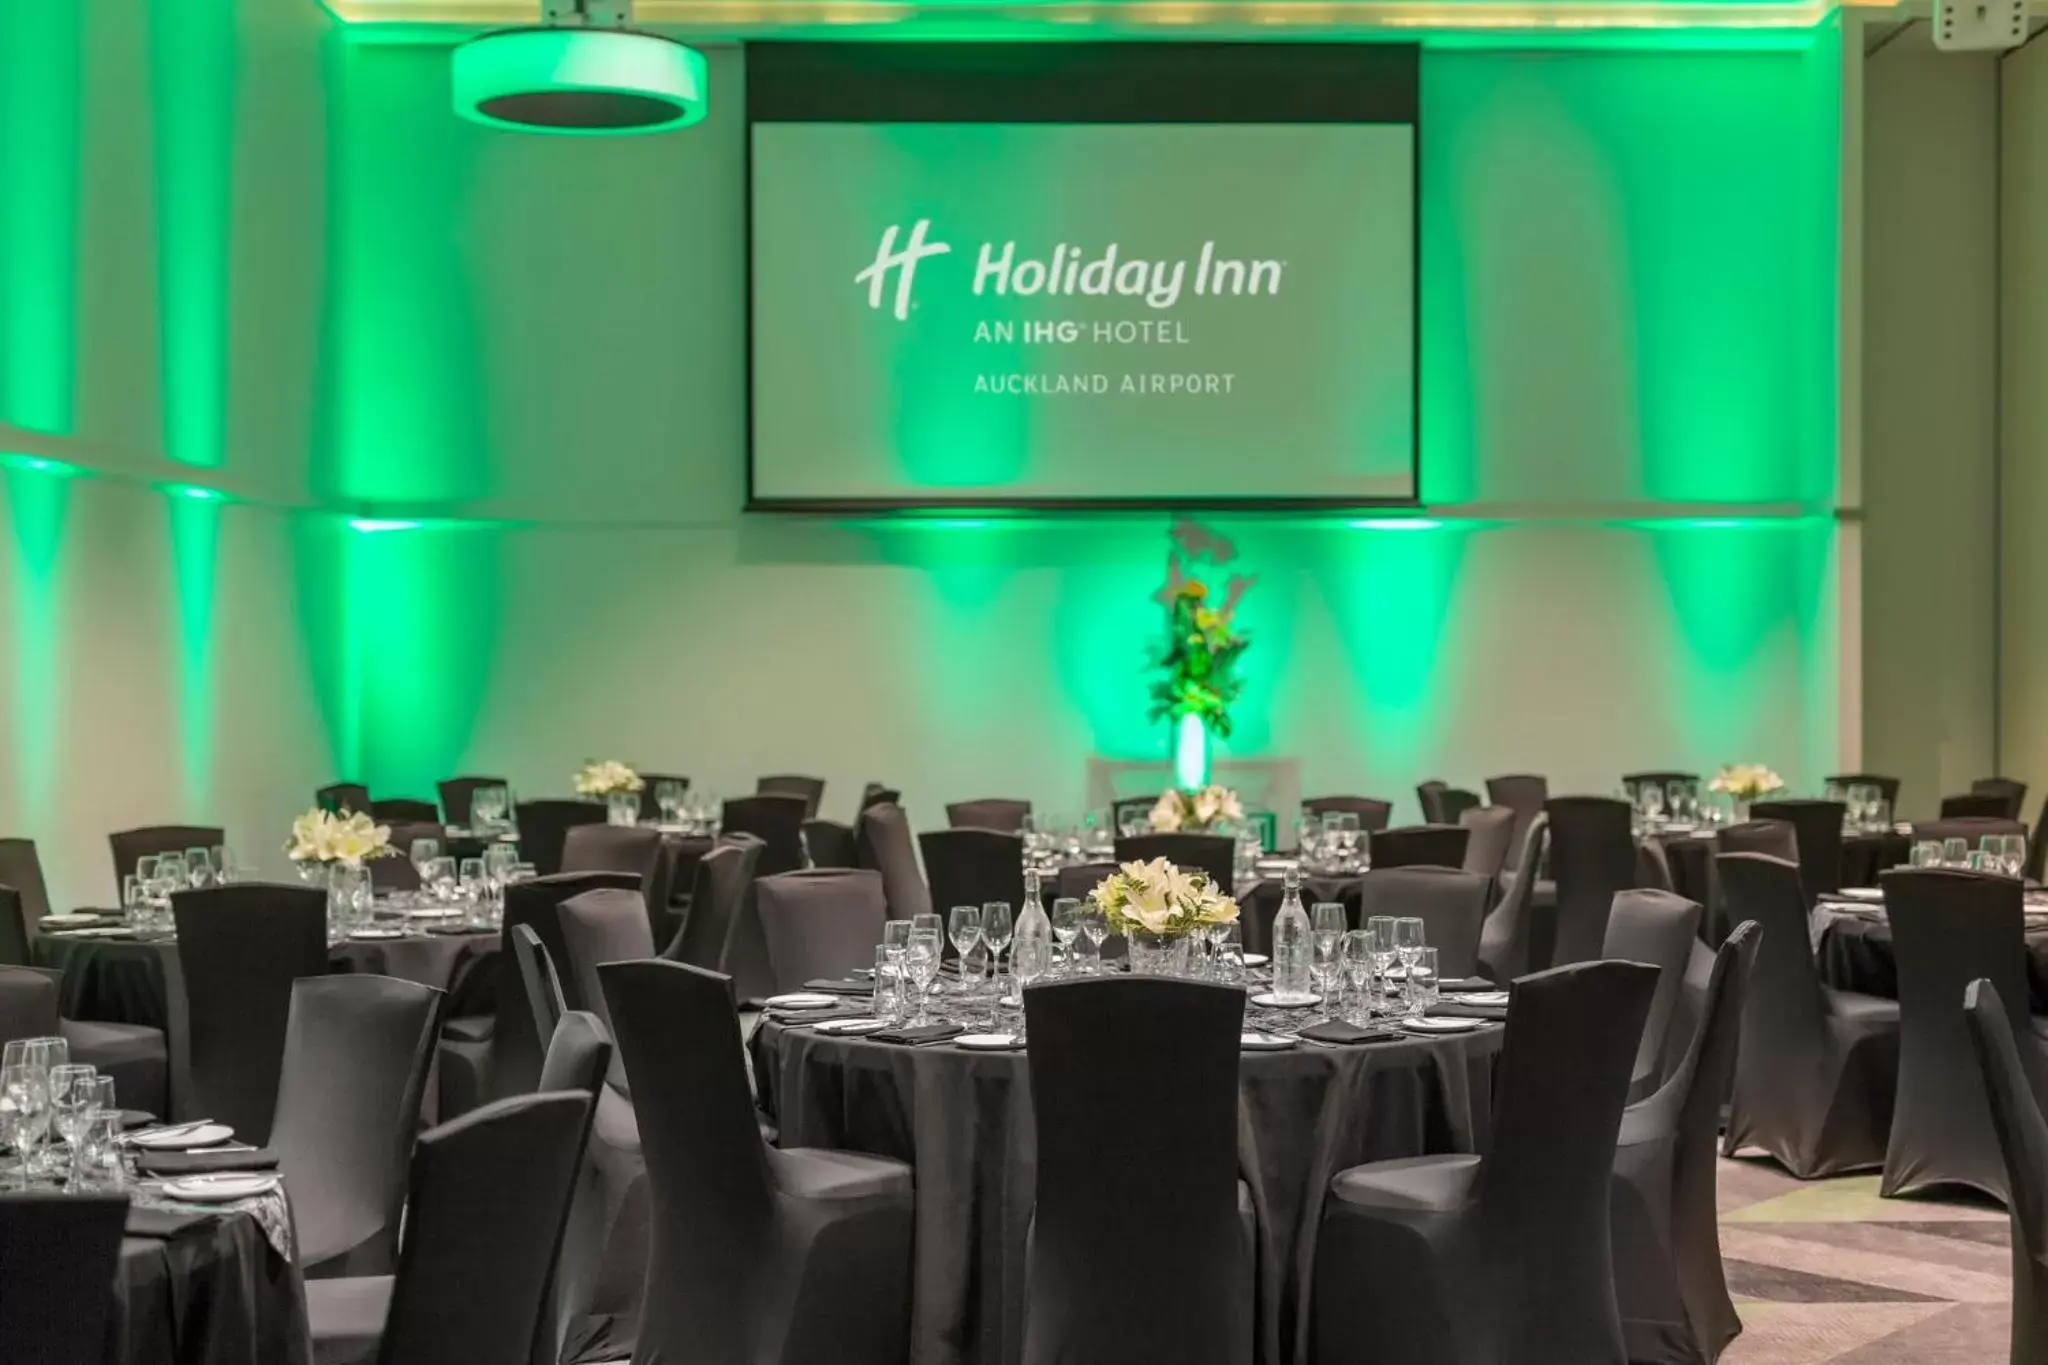 Banquet/Function facilities, Banquet Facilities in Holiday Inn Auckland Airport, an IHG Hotel